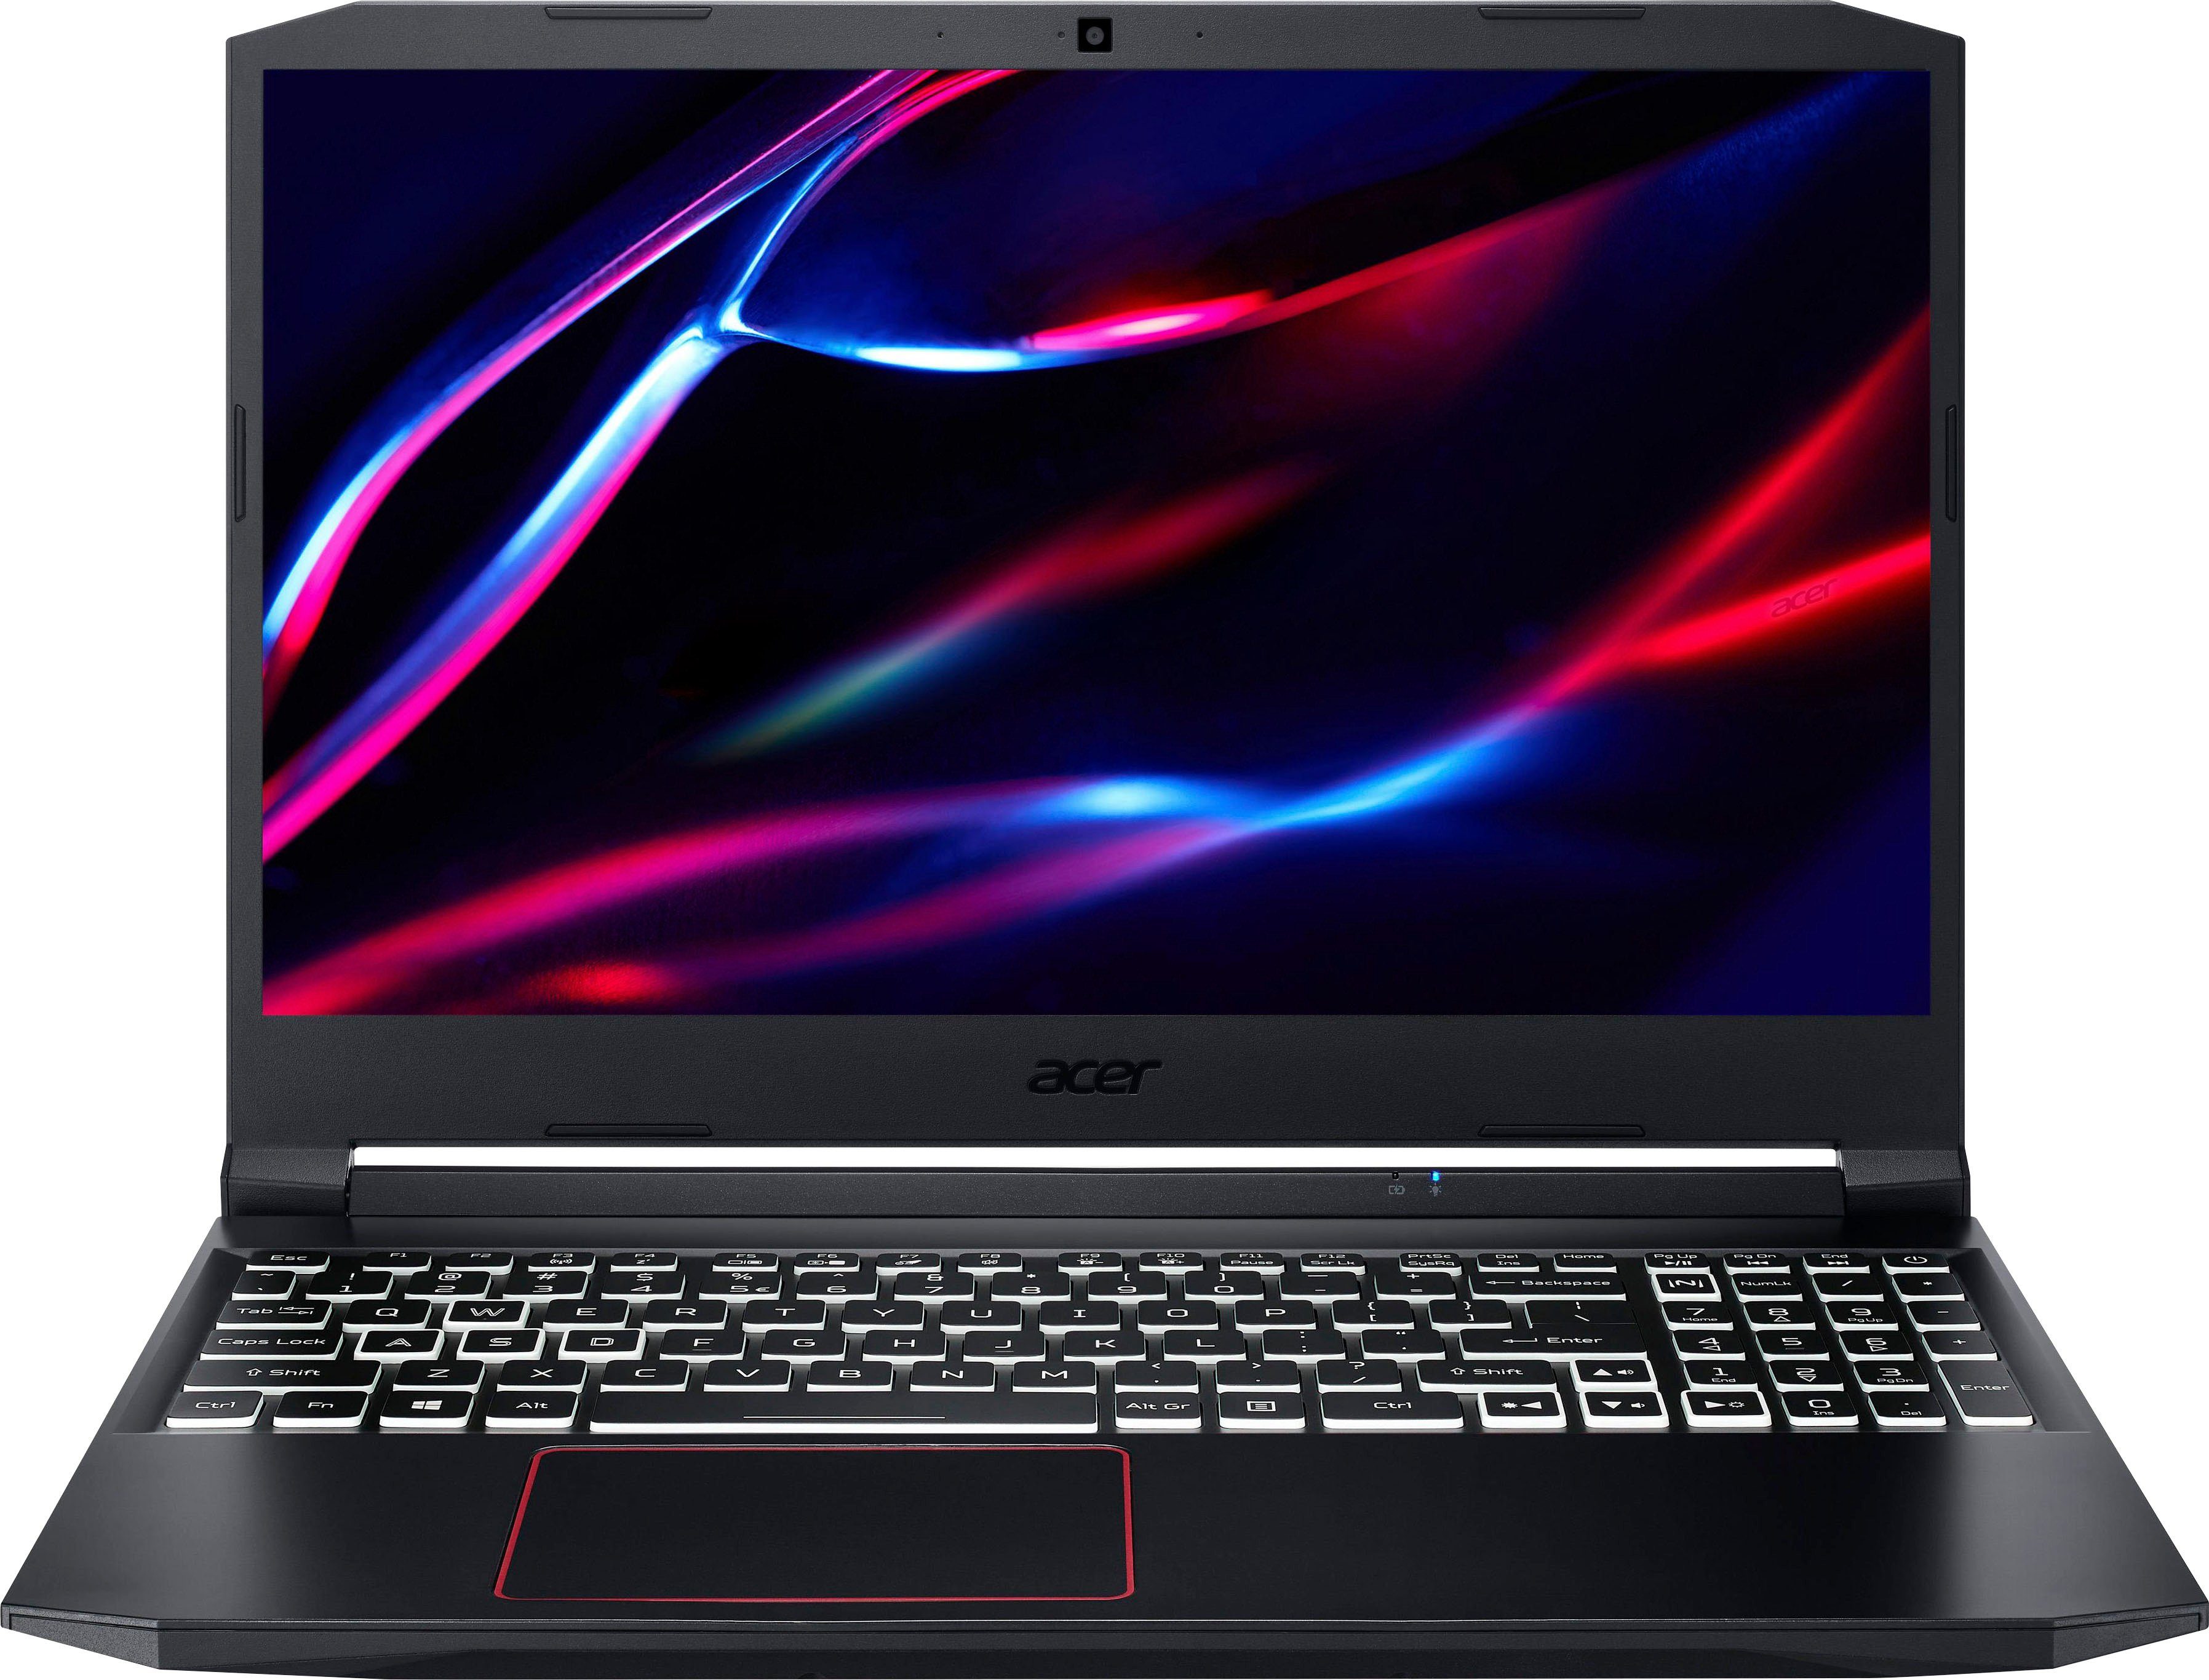 Core GB Acer Nitro Gaming-Notebook i7 cm/15,6 Zoll, SSD) 10750H, AN515-55-766W RTX 5 GeForce 512 (39,62 Intel 3060,